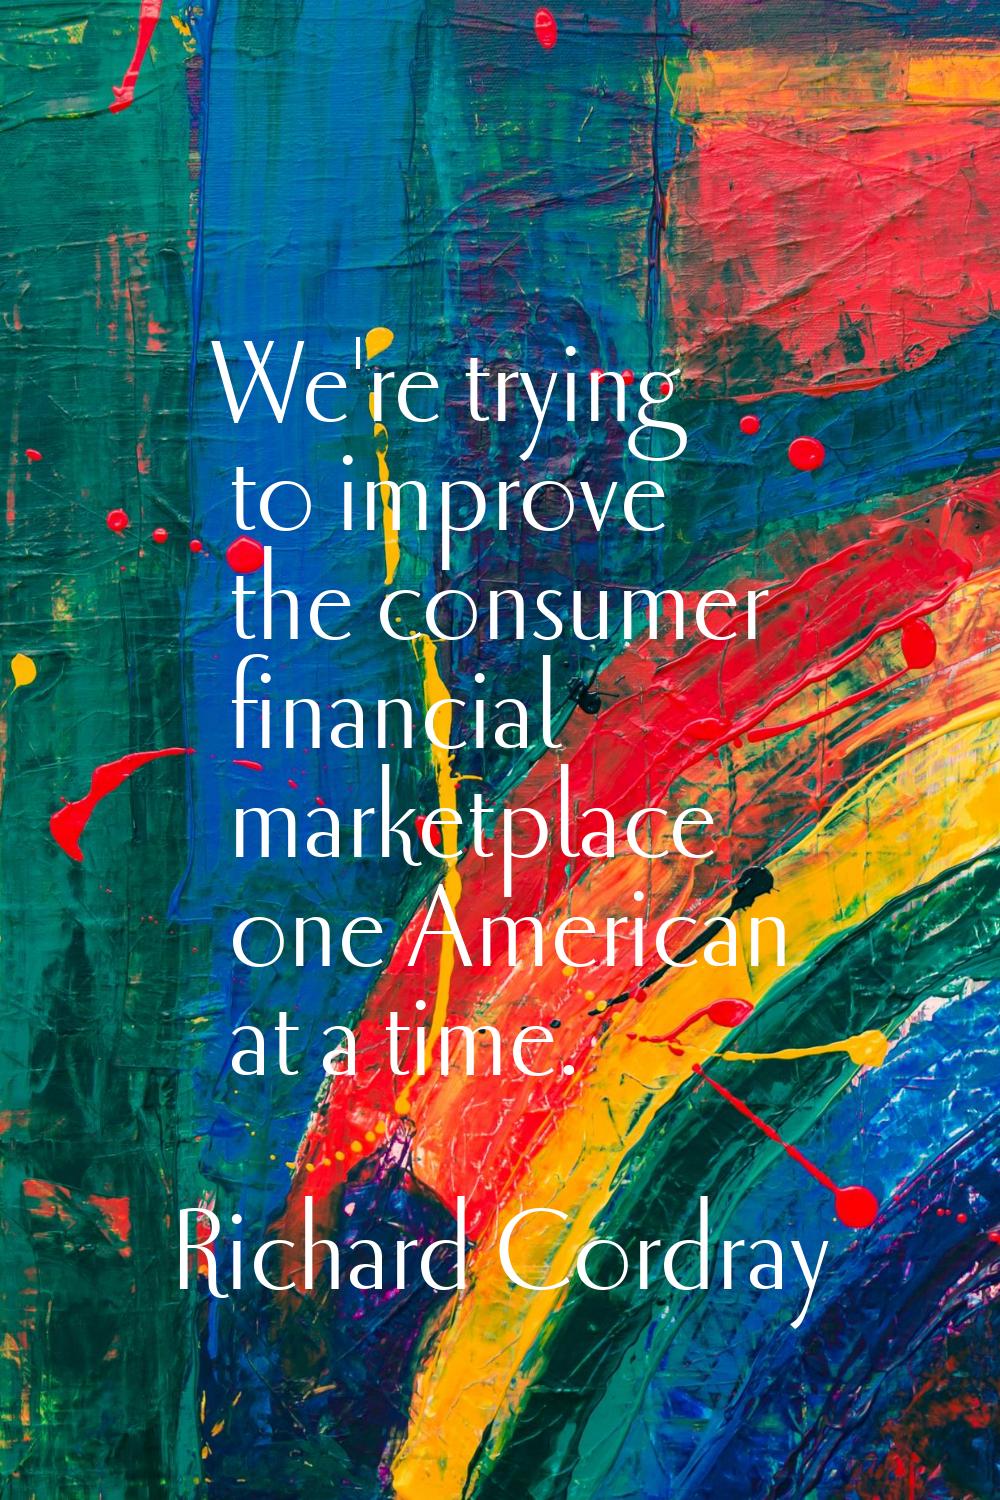 We're trying to improve the consumer financial marketplace one American at a time.